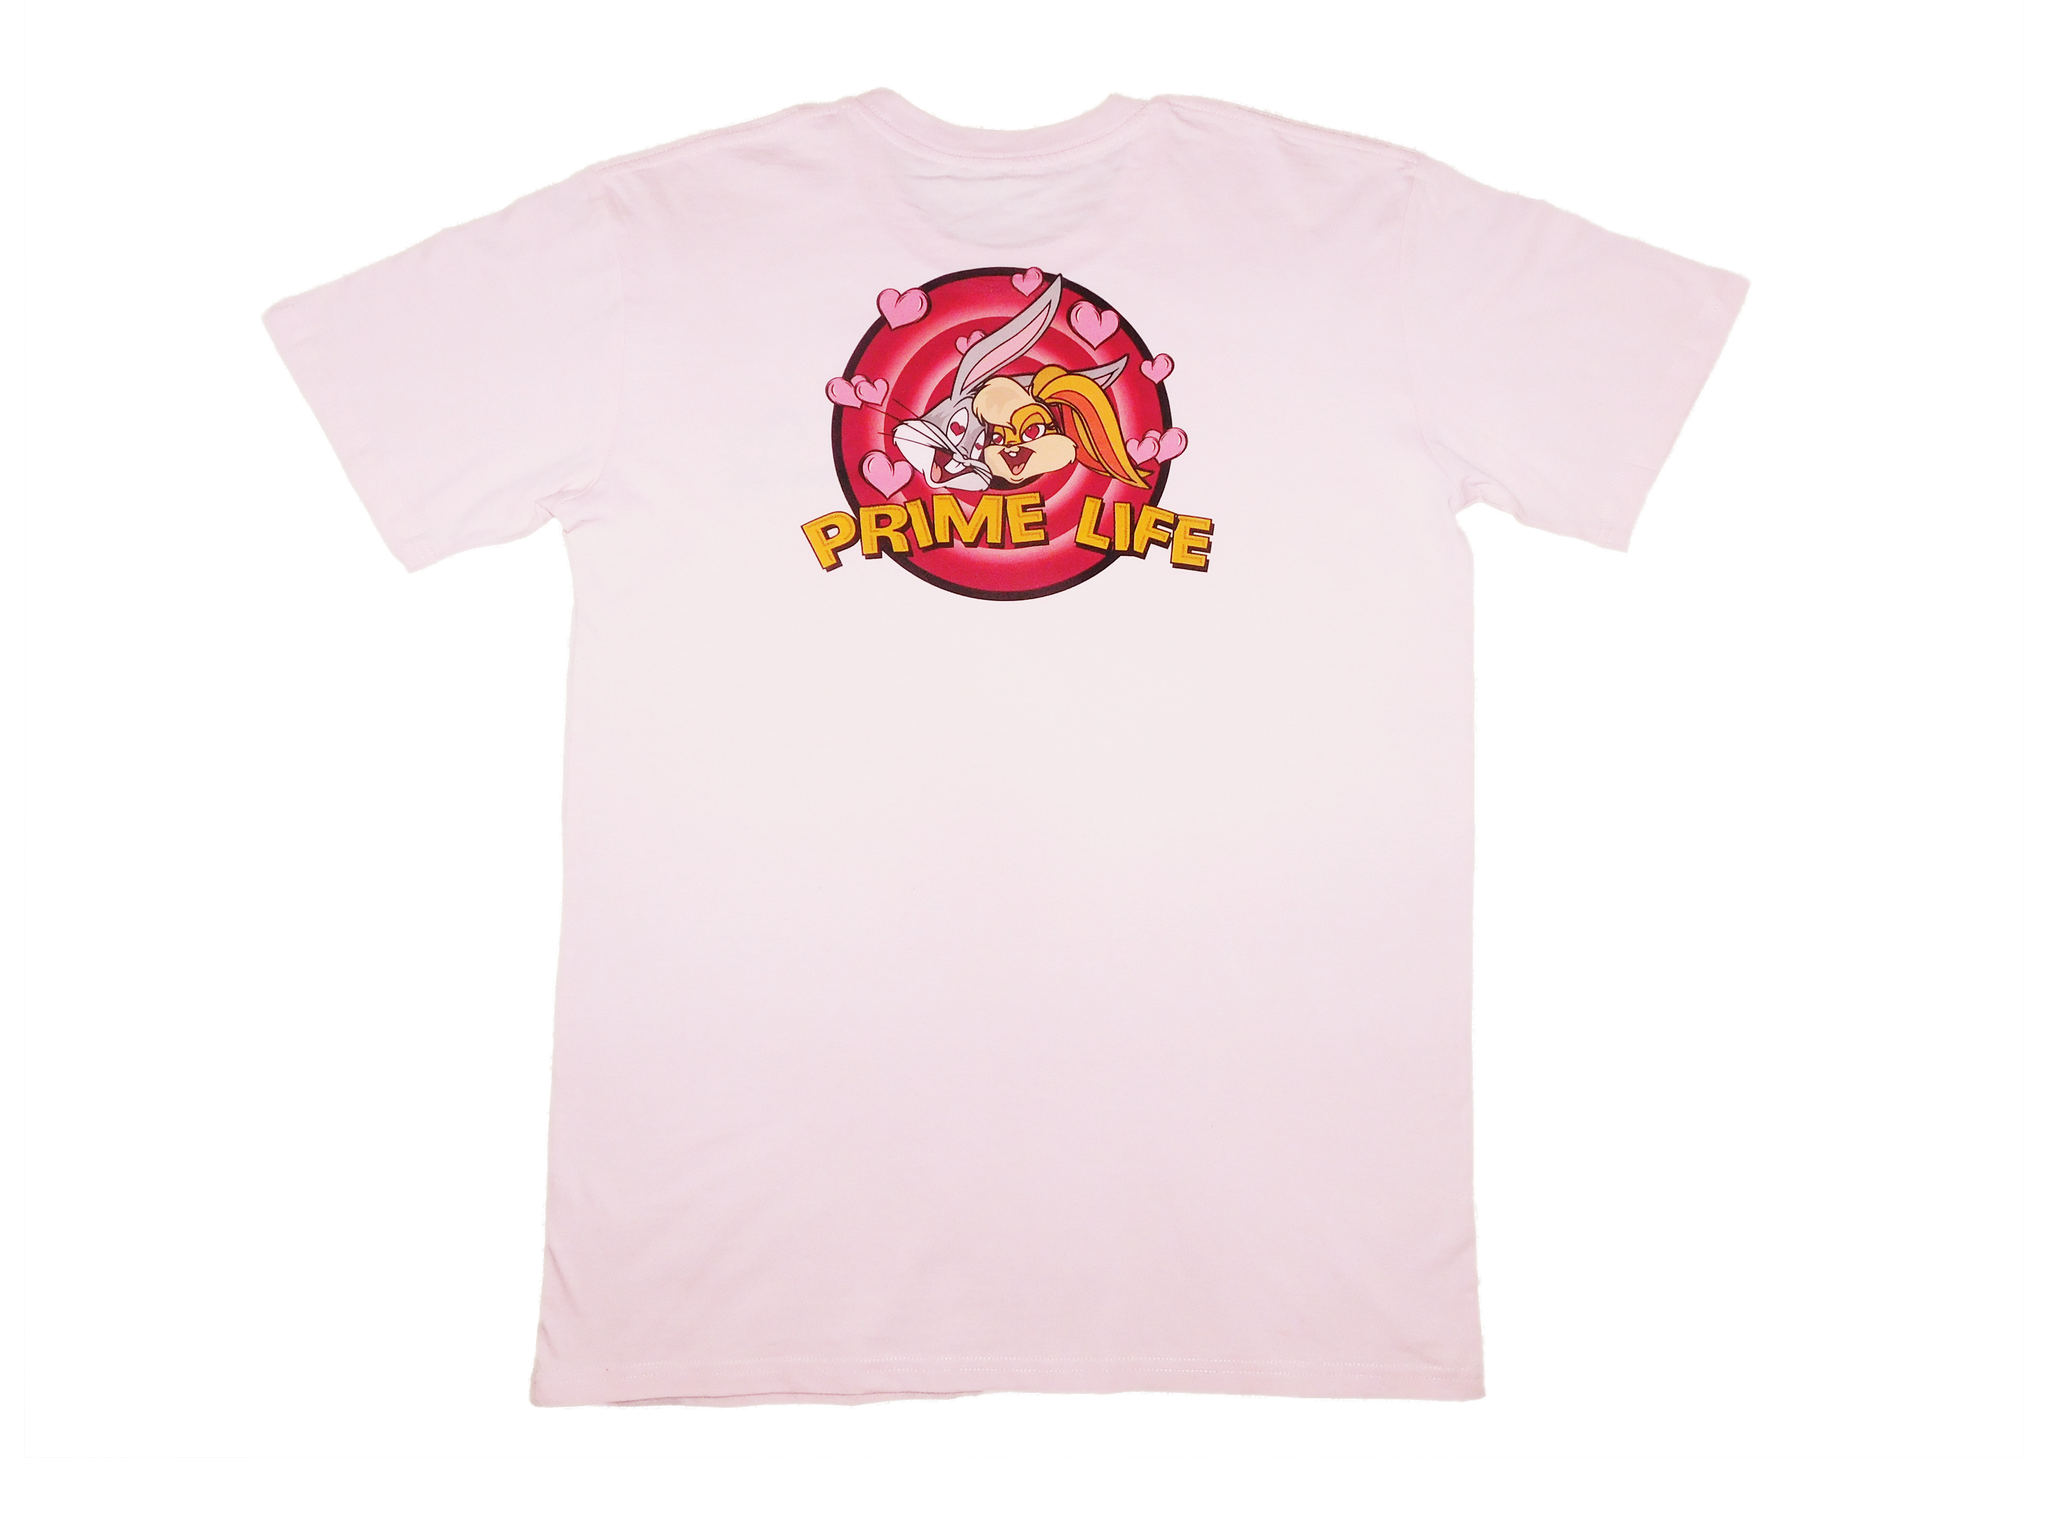 Looney Tunes T-shirt [pink]